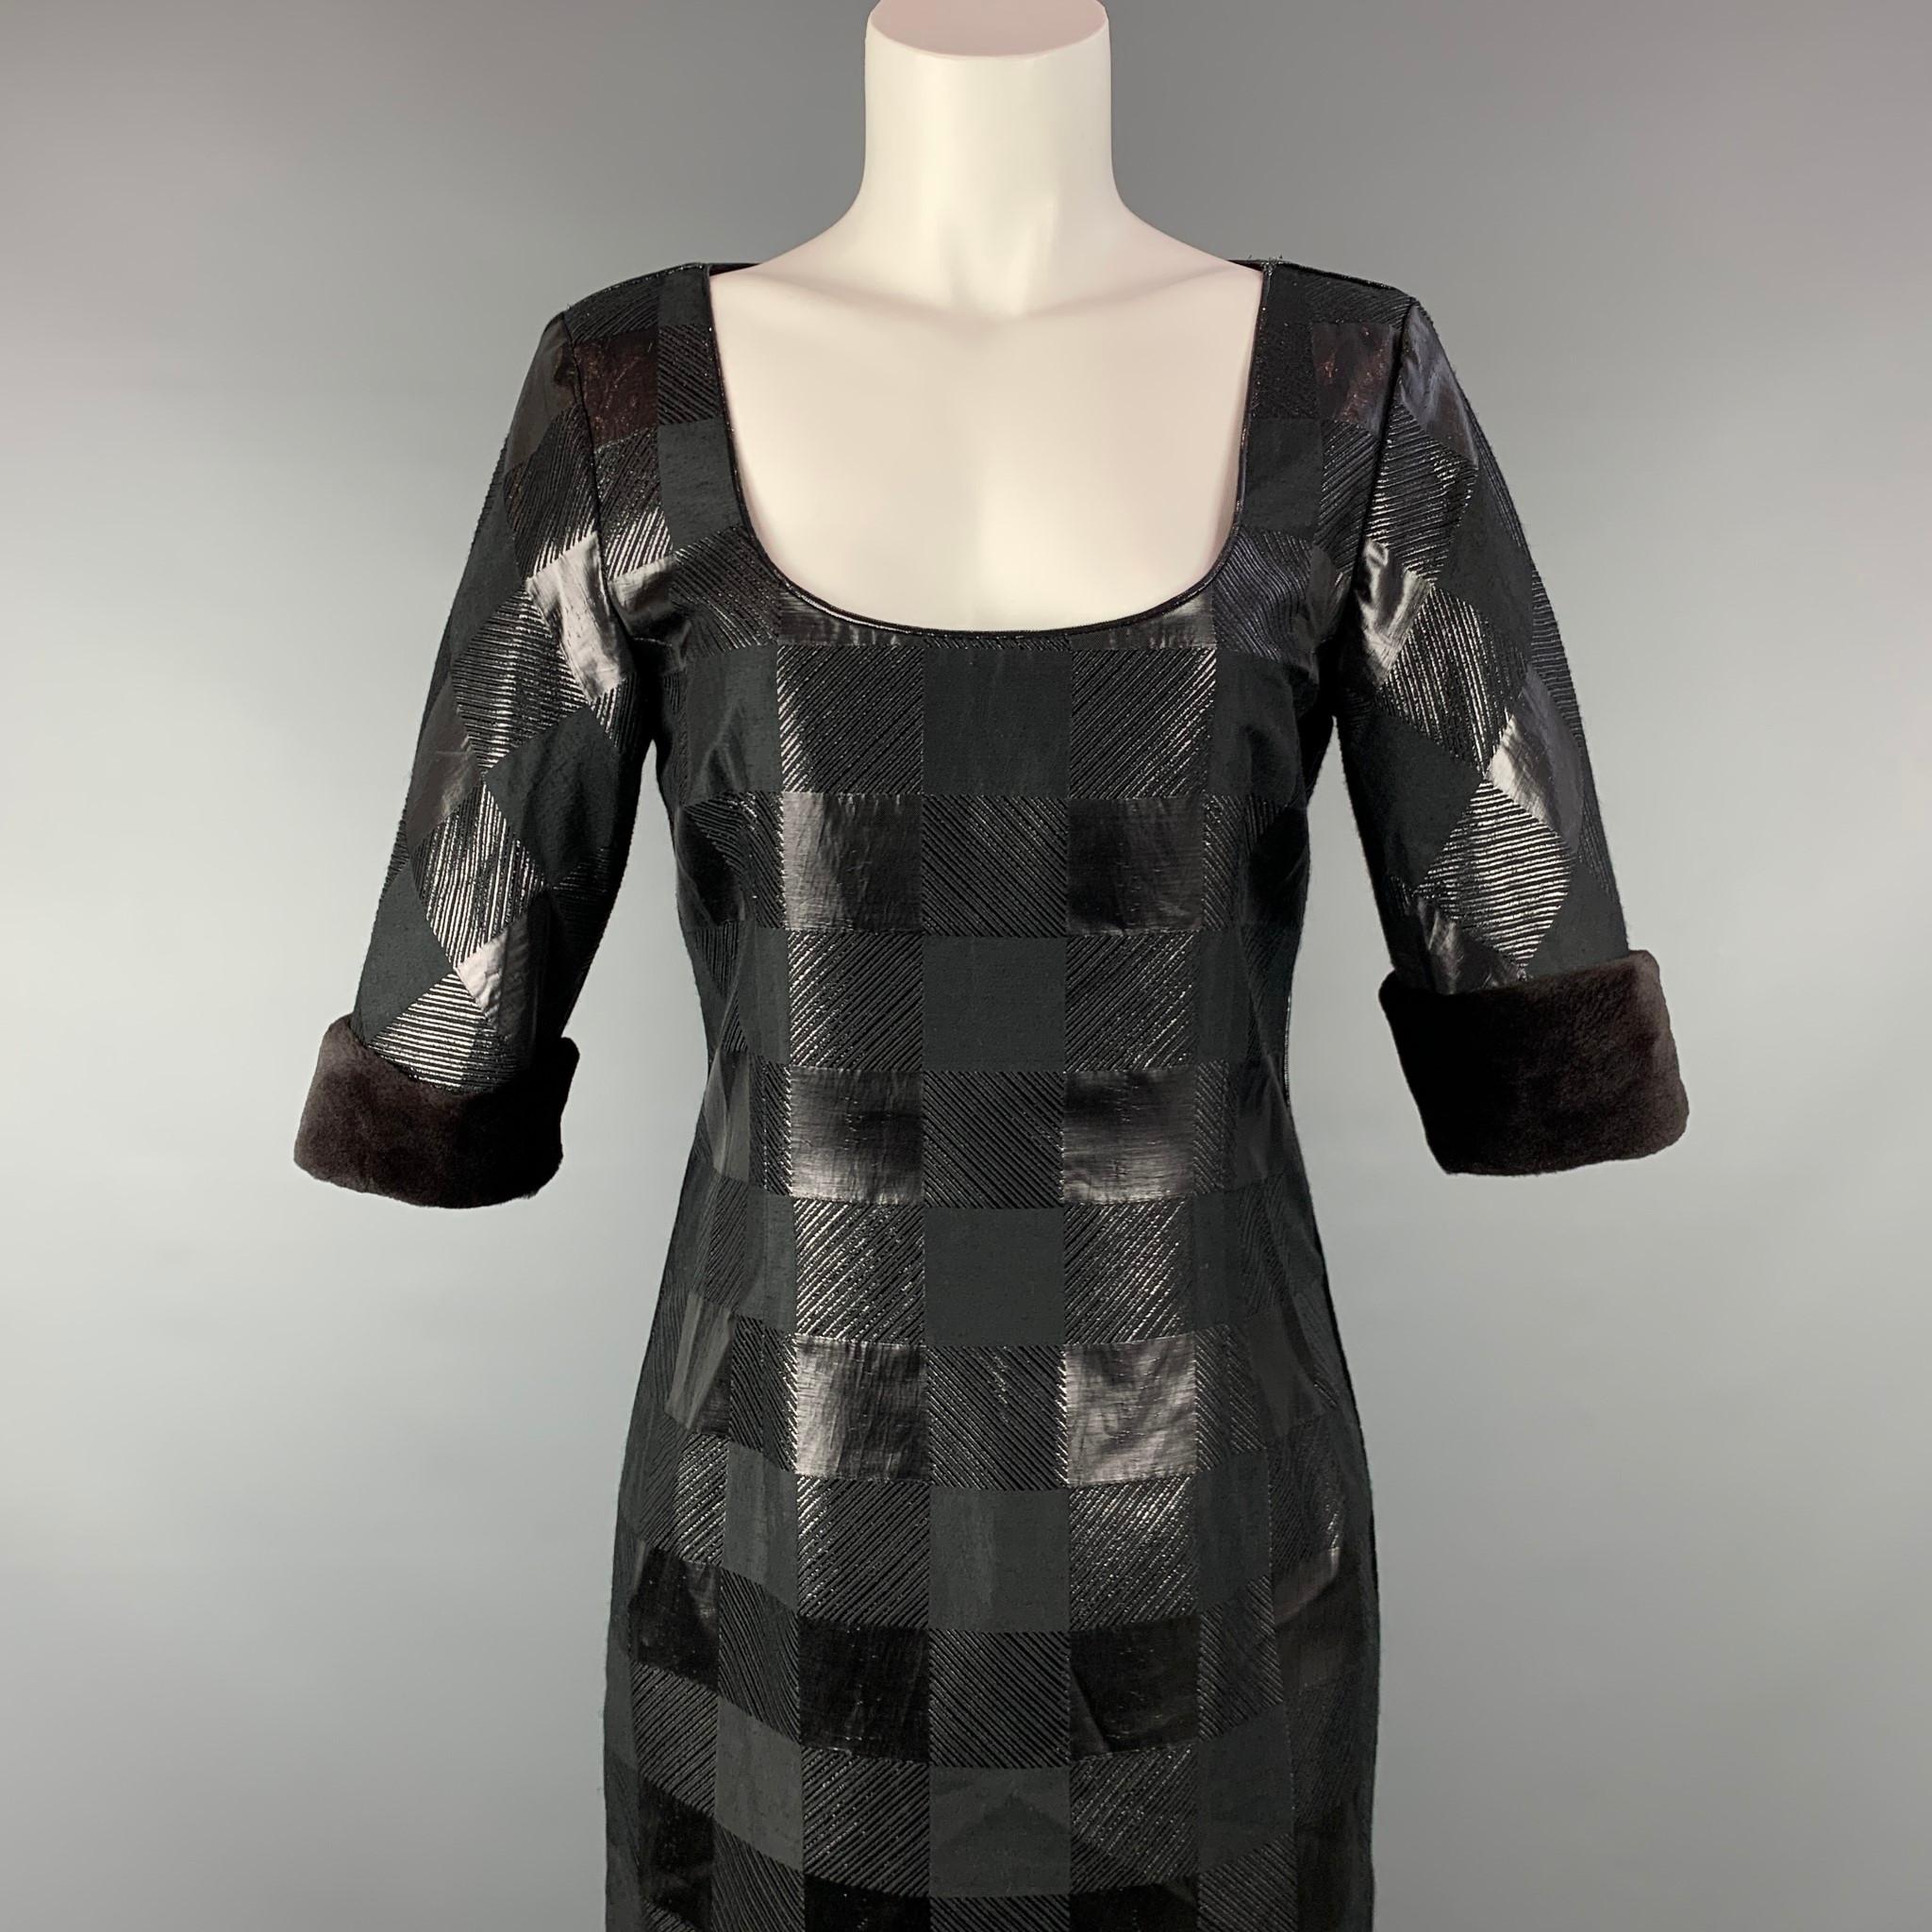 GIORGIO ARMANI cocktail dress comes in a black viscose blend with a purple liner featuring a shift style, fur trim, and a back zip up closure. Made in Italy.

Very Good Pre-Owned Condition.
Marked: 46

Measurements:

Shoulder: 16 in.
Bust: 35